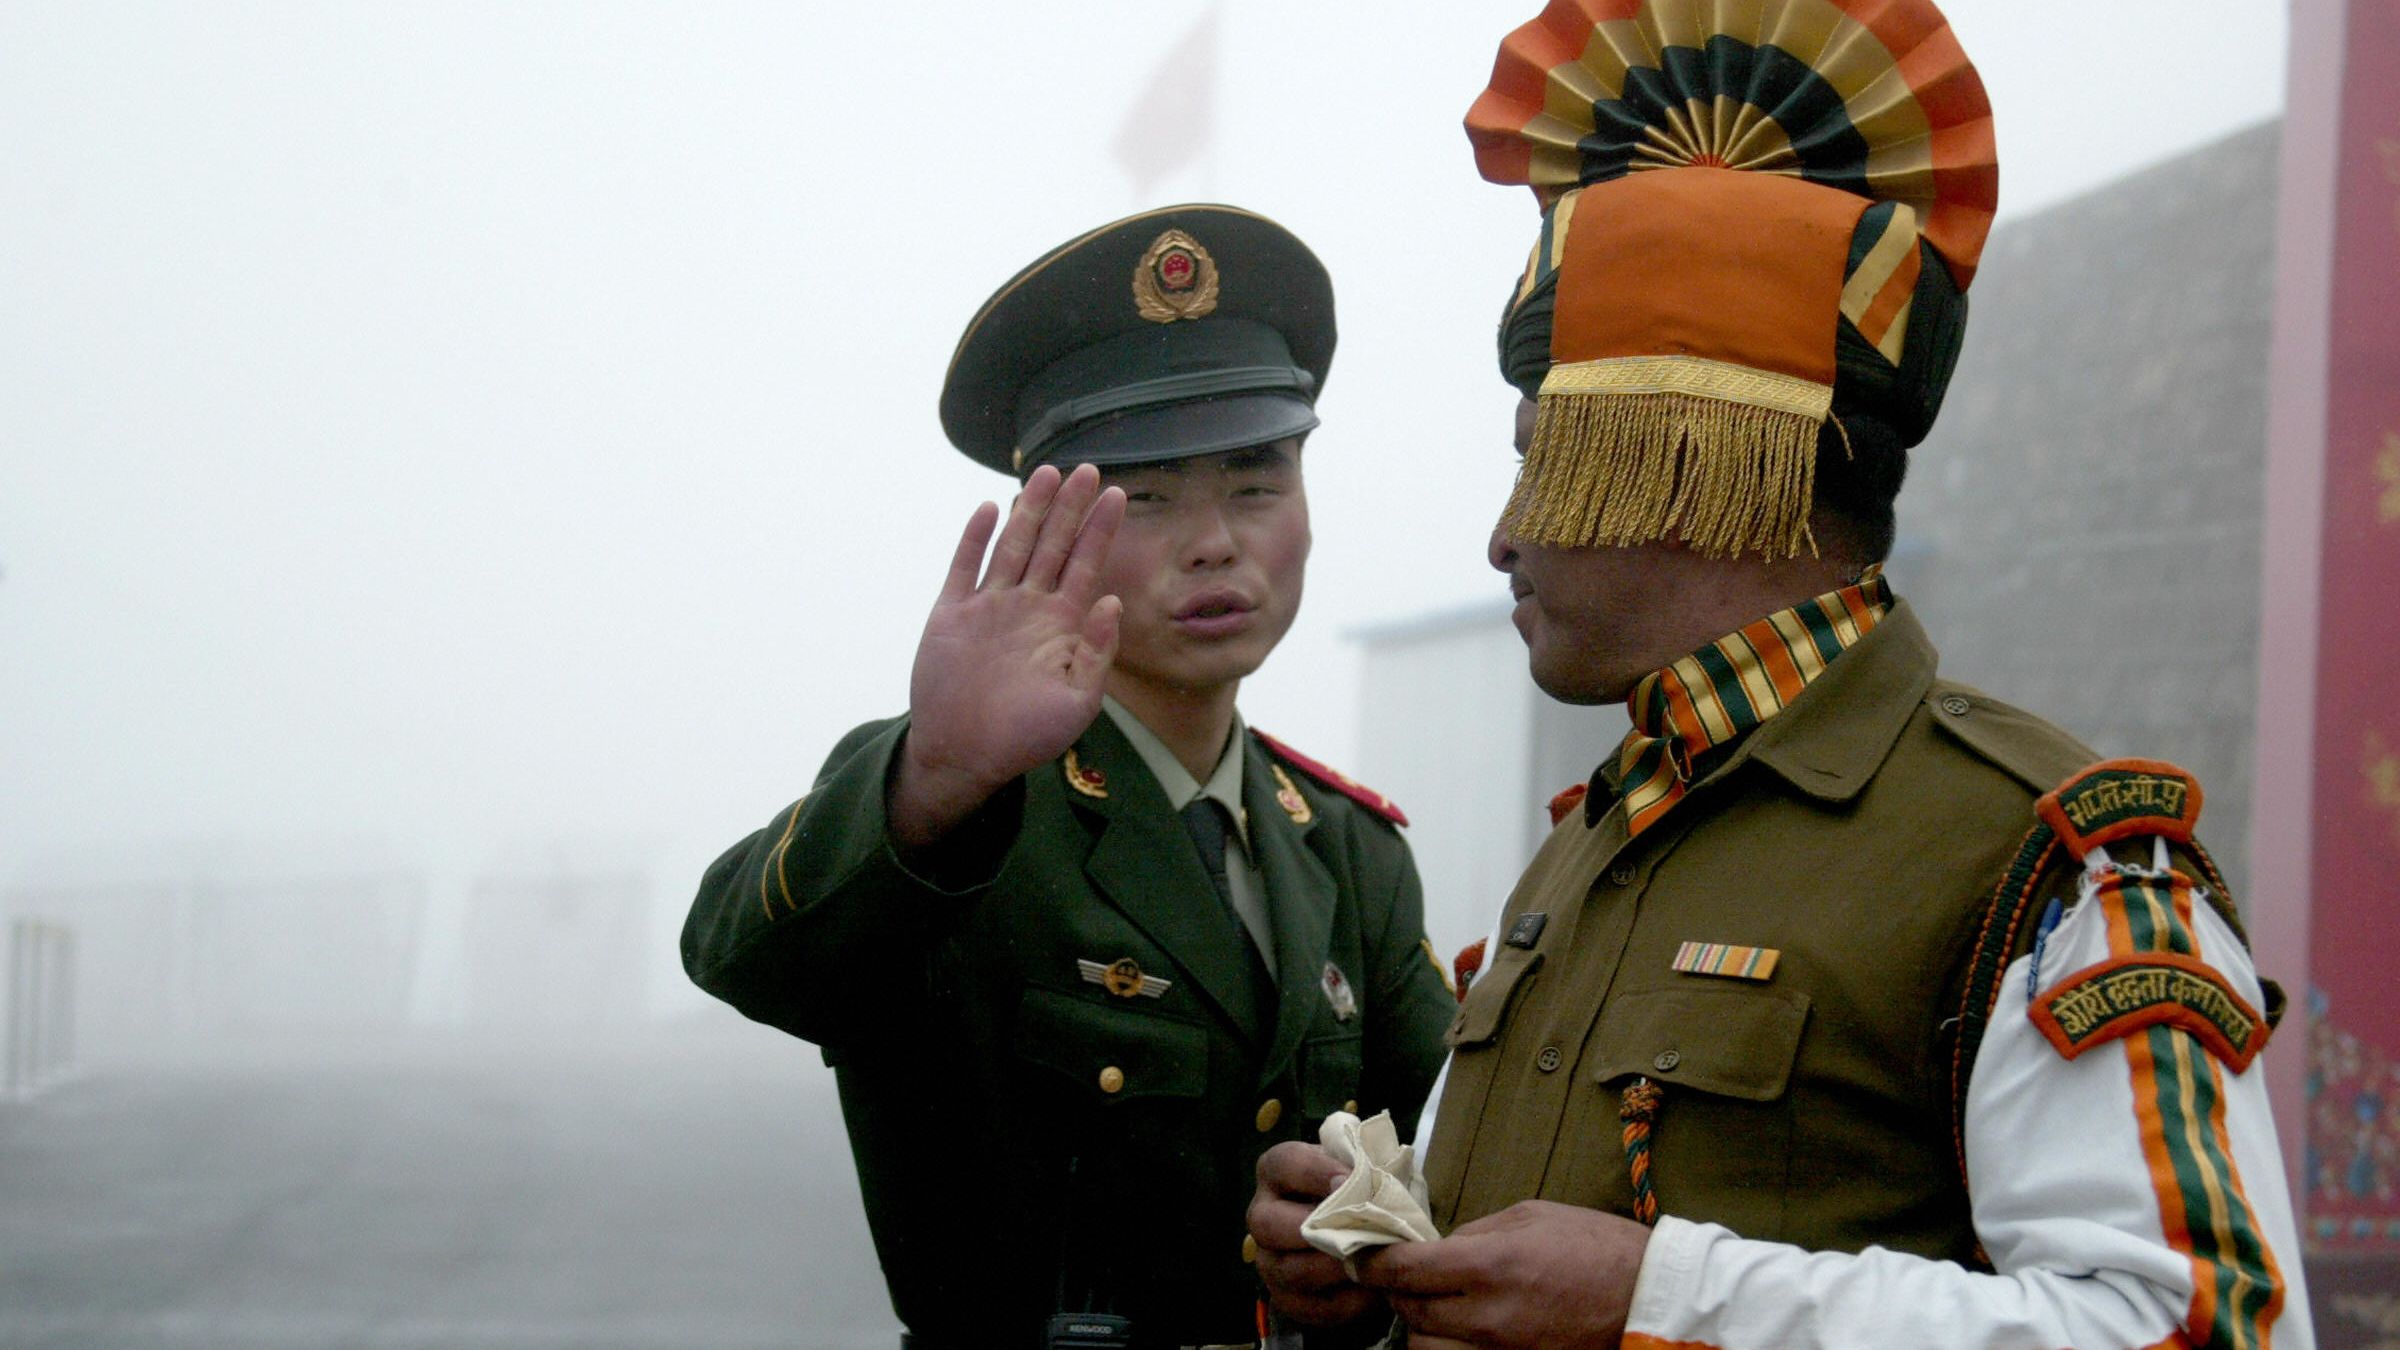  A Chinese soldier stands near an Indian soldier at the ancient Nathu La border crossing.